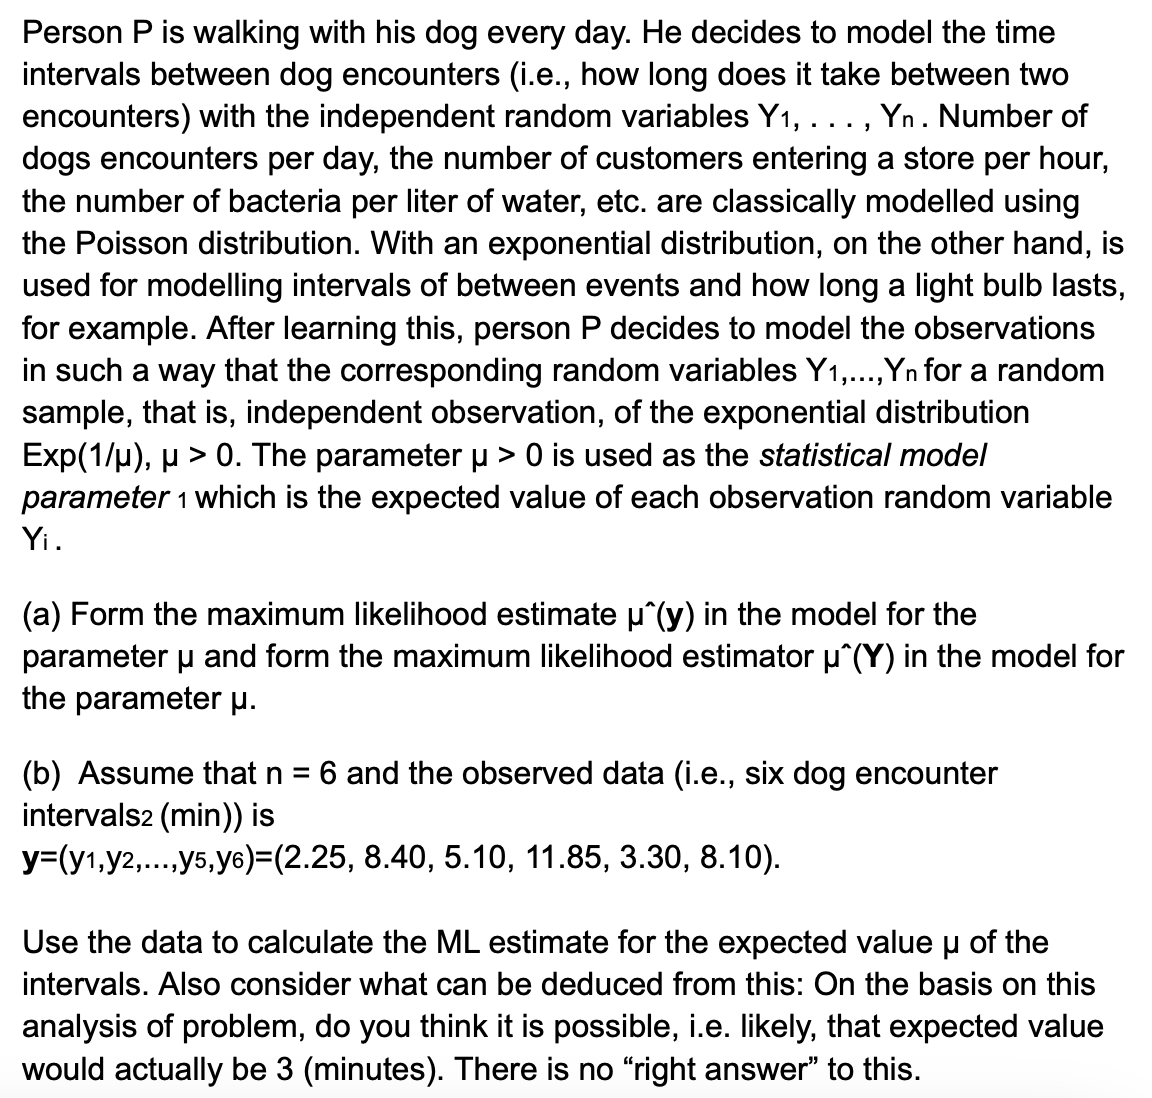 Person P is walking with his dog every day. He decides to model the time
intervals between dog encounters (i.e., how long does it take between two
encounters) with the independent random variables Y₁, . . ., Yn . Number of
dogs encounters per day, the number of customers entering a store per hour,
the number of bacteria per liter of water, etc. are classically modelled using
the Poisson distribution. With an exponential distribution, on the other hand, is
used for modelling intervals of between events and how long a light bulb lasts,
for example. After learning this, person P decides to model the observations
in such a way that the corresponding random variables Y1,..., Yn for a random
sample, that is, independent observation, of the exponential distribution
Exp(1/µ), µ > 0. The parameter µ > 0 is used as the statistical model
parameter 1 which is the expected value of each observation random variable
Yi.
(a) Form the maximum likelihood estimate μ^(y) in the model for the
parameter μ and form the maximum likelihood estimator µ^(Y) in the model for
the parameter μ.
(b) Assume that n
=
intervals2 (min)) is
6 and the observed data (i.e., six dog encounter
y=(y1,y2,...,y5,y6)=(2.25, 8.40, 5.10, 11.85, 3.30, 8.10).
Use the data to calculate the ML estimate for the expected value μ of the
intervals. Also consider what can be deduced from this: On the basis on this
analysis of problem, do you think it is possible, i.e. likely, that expected value
would actually be 3 (minutes). There is no "right answer" to this.